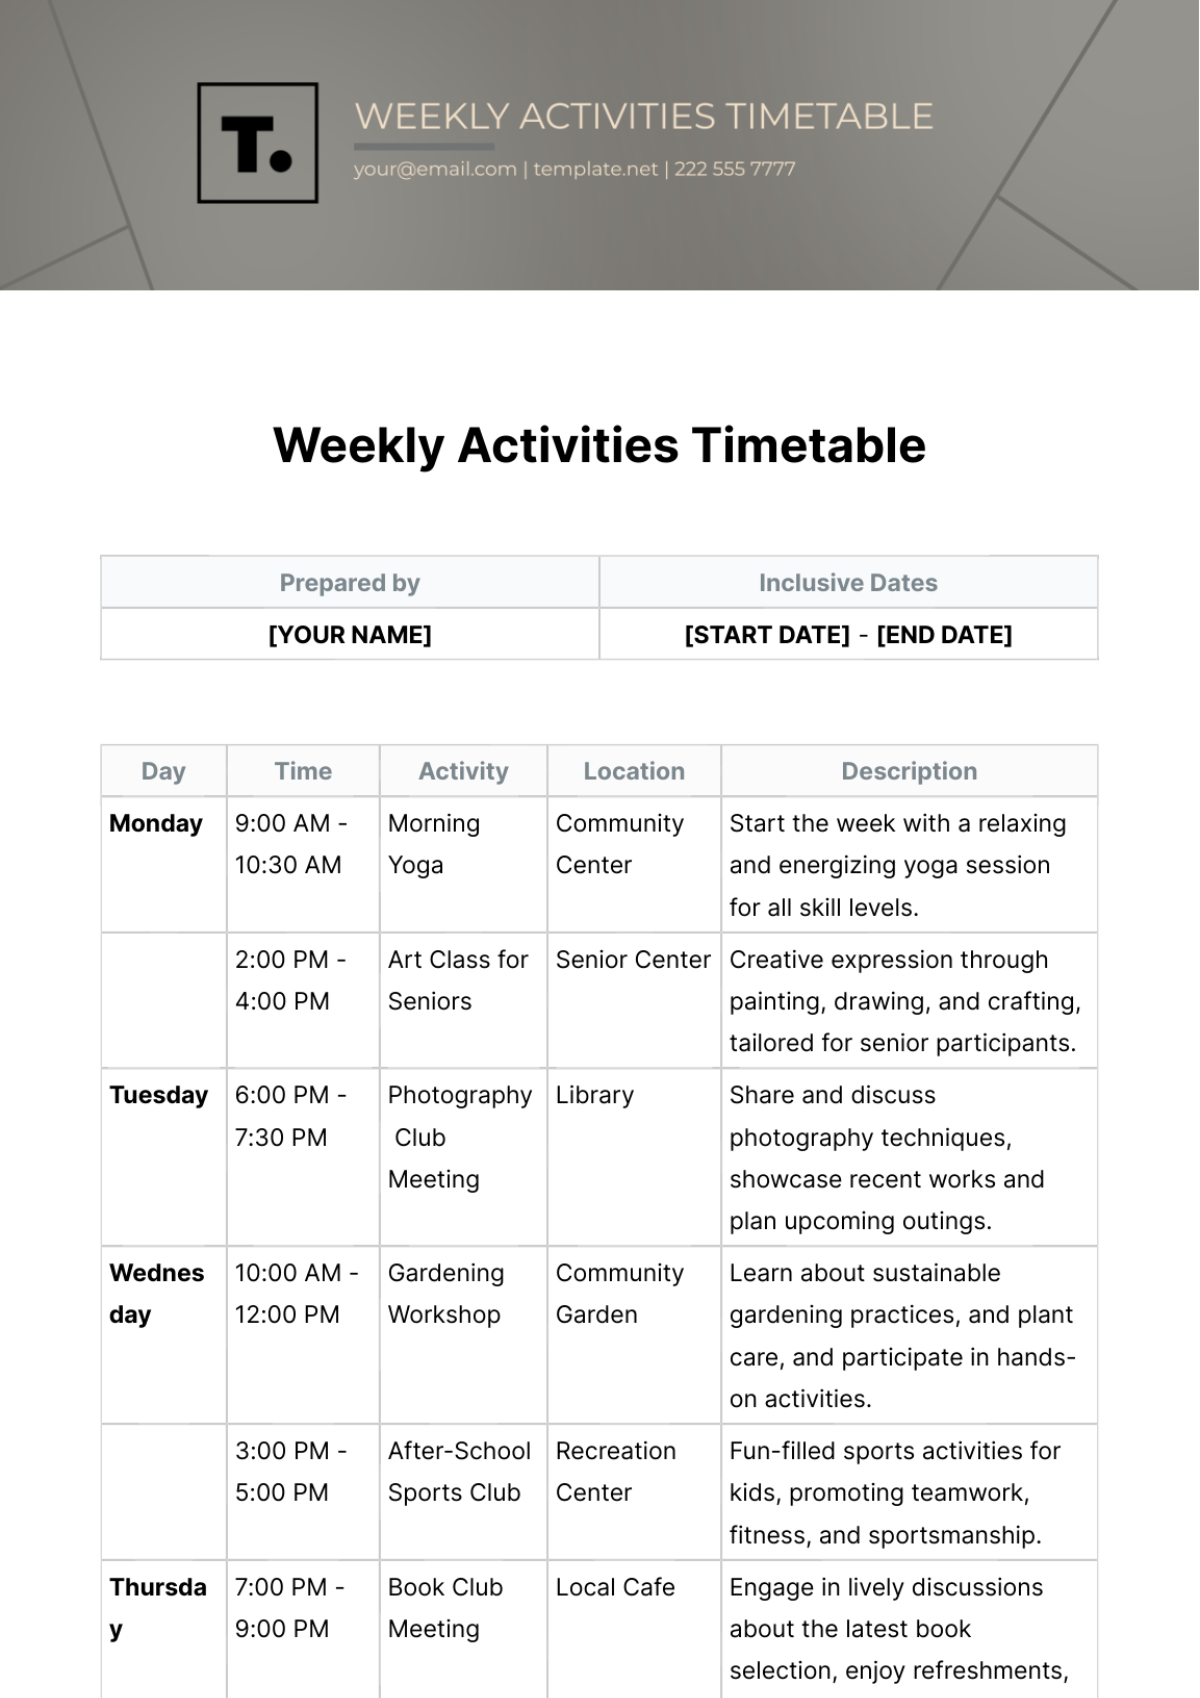 Weekly Activities Timetable Template